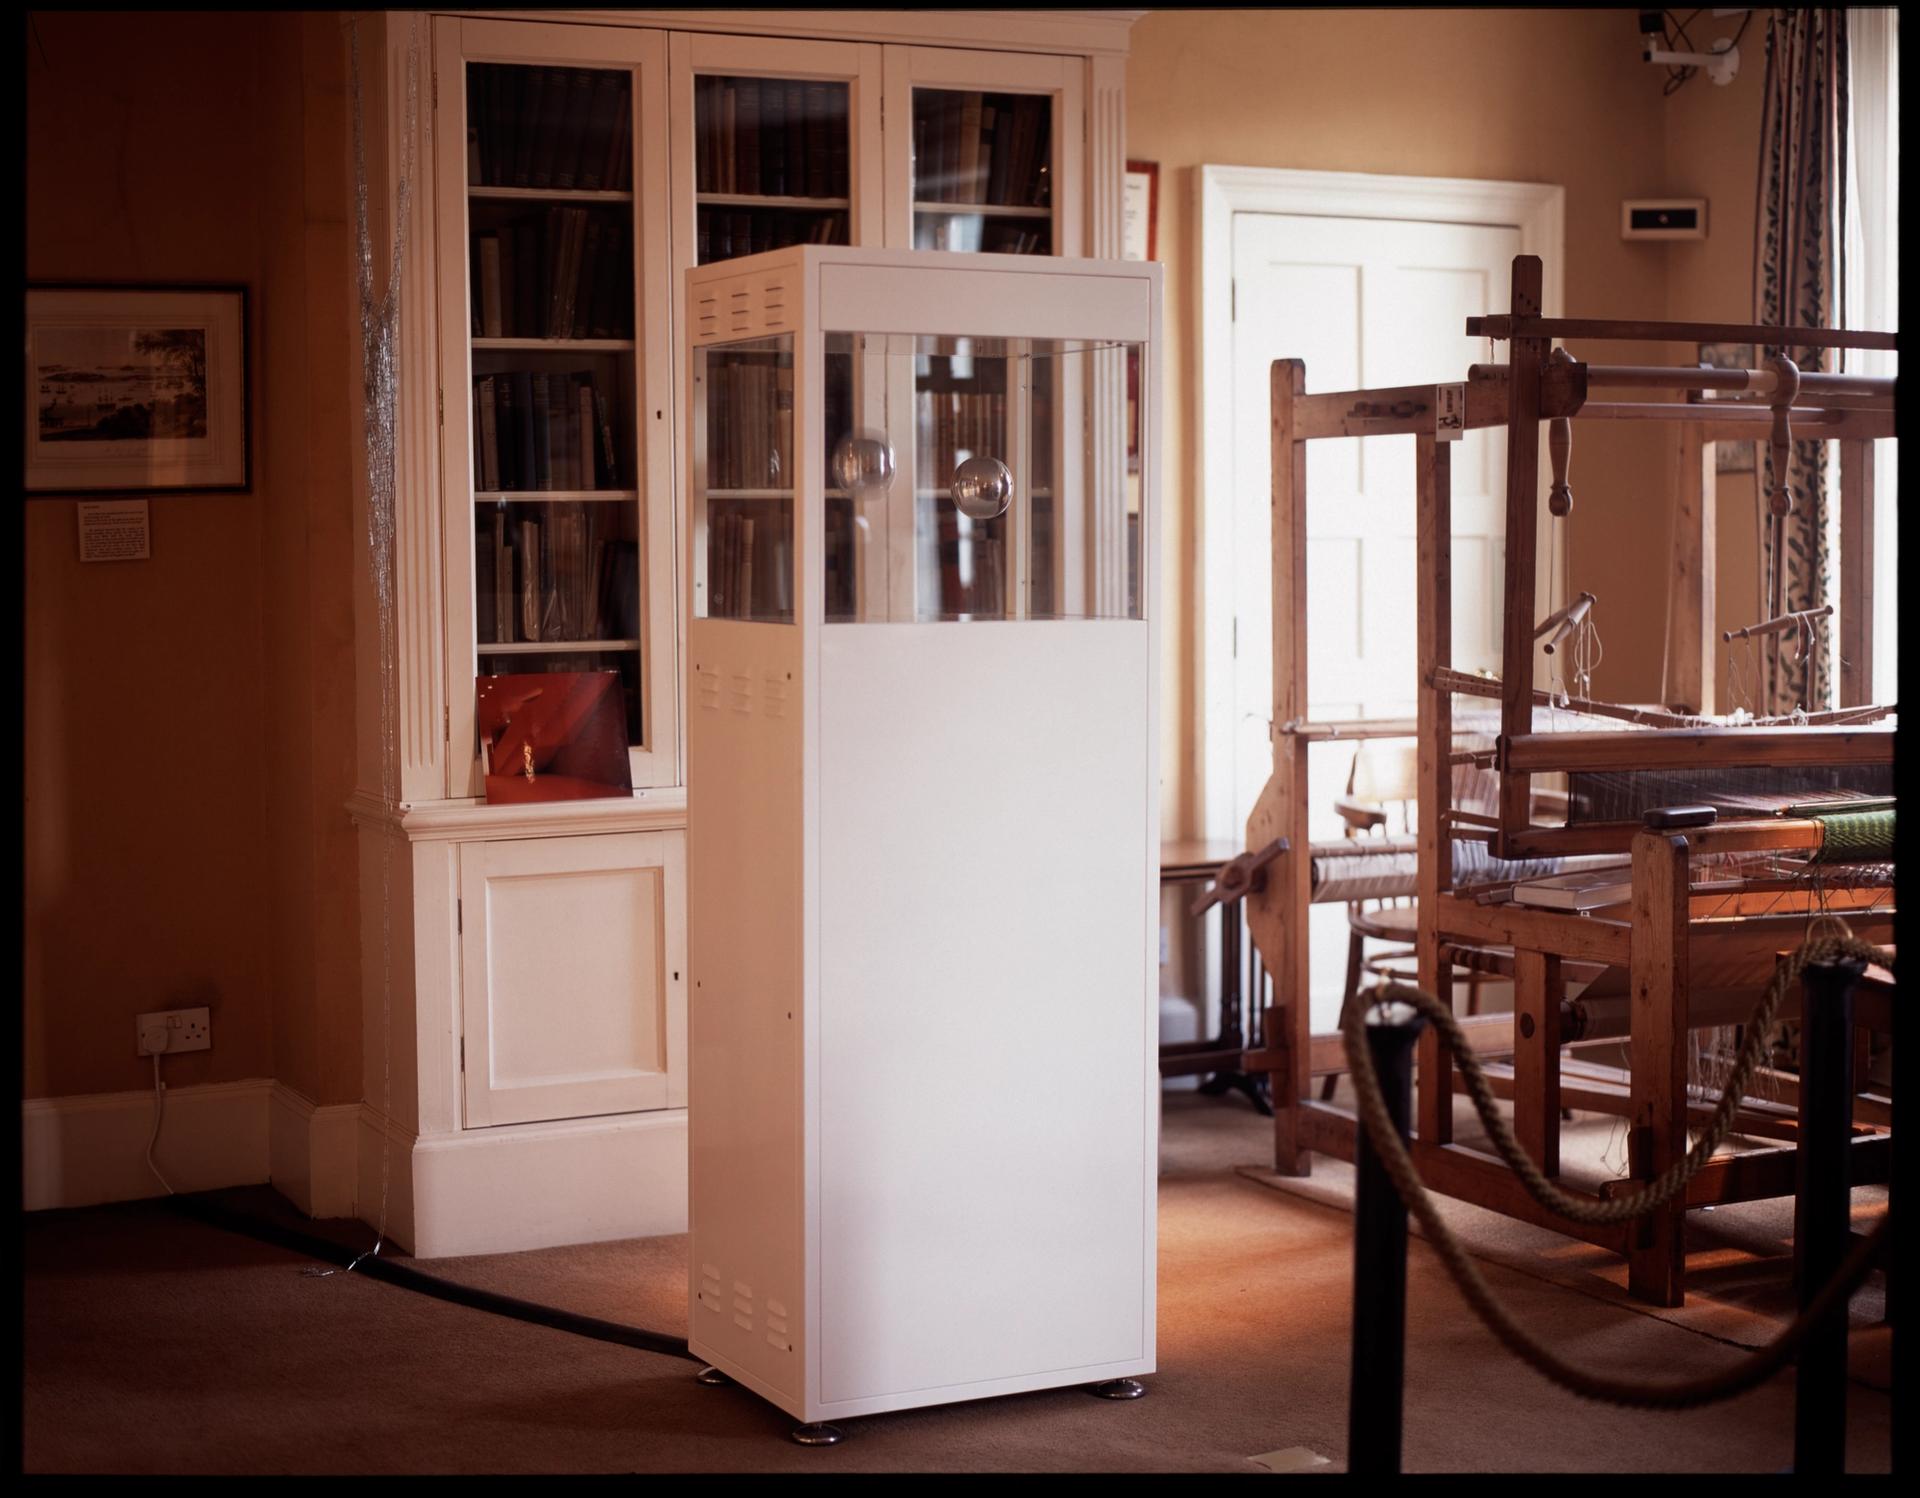 Sculpture comprising white steel cabinet next to large loom in a room with a large book cabinet